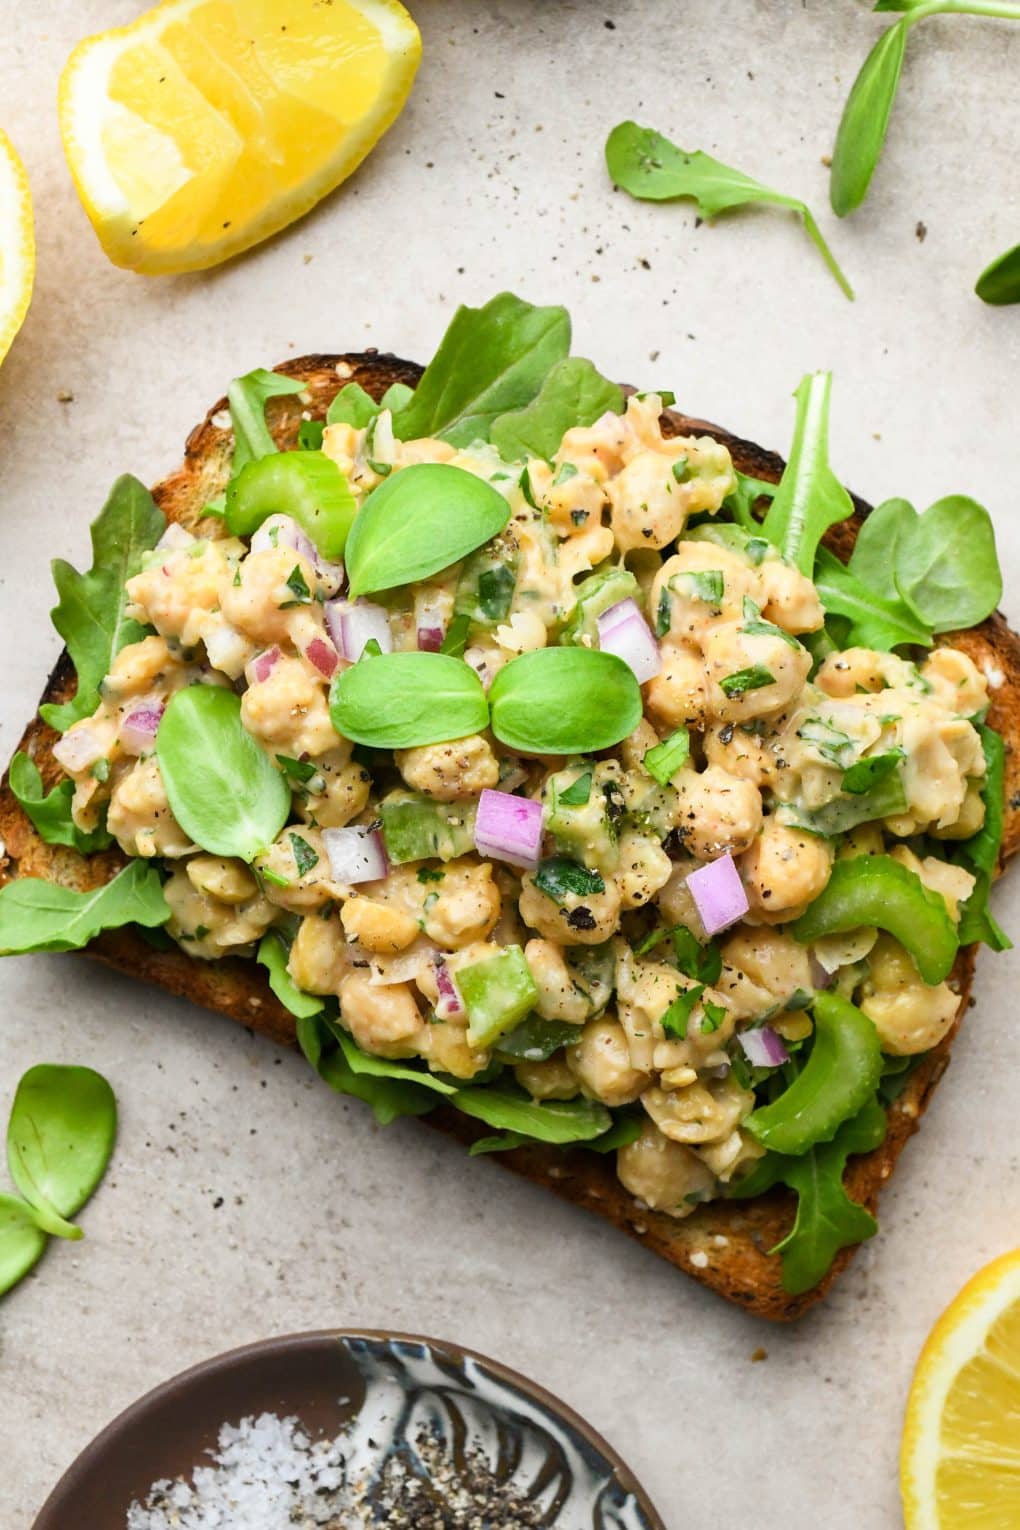 Smashed chickpea salad on a piece of bread for a sandwich, topped with fresh sprouts on a light brown textured background.